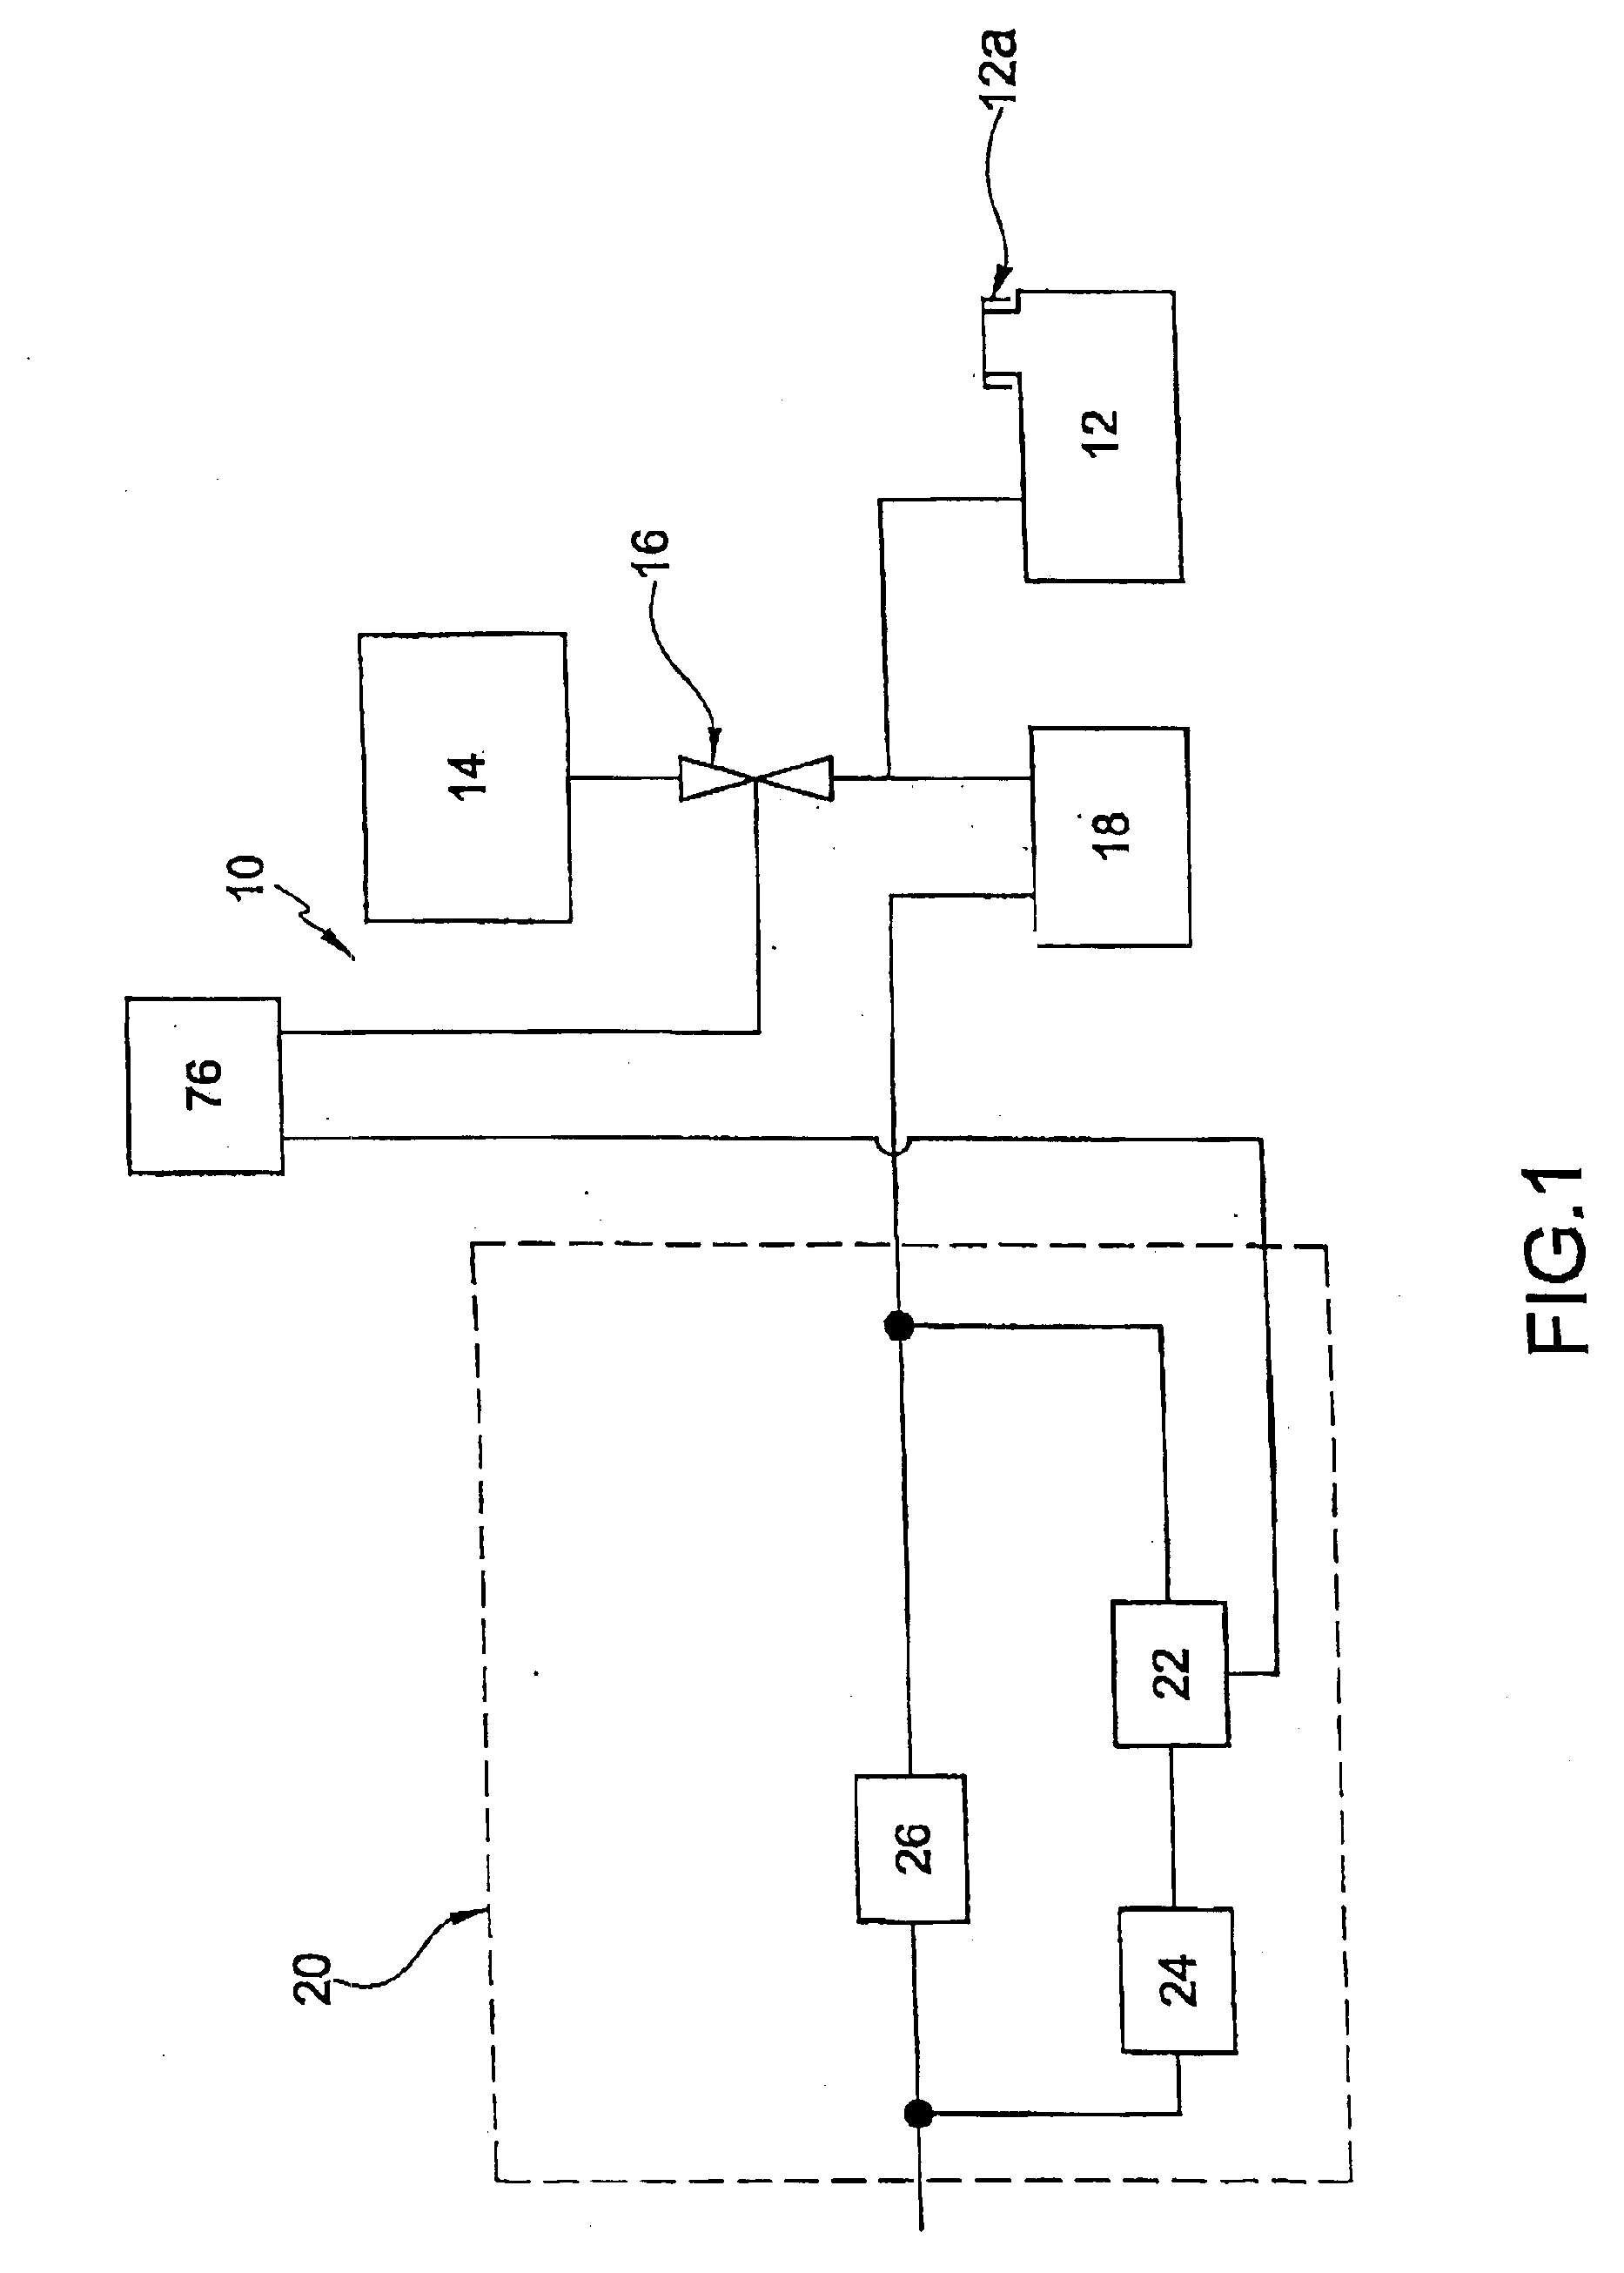 Apparatus and method for preventing resonance in a fuel vapor pressure management apparatus